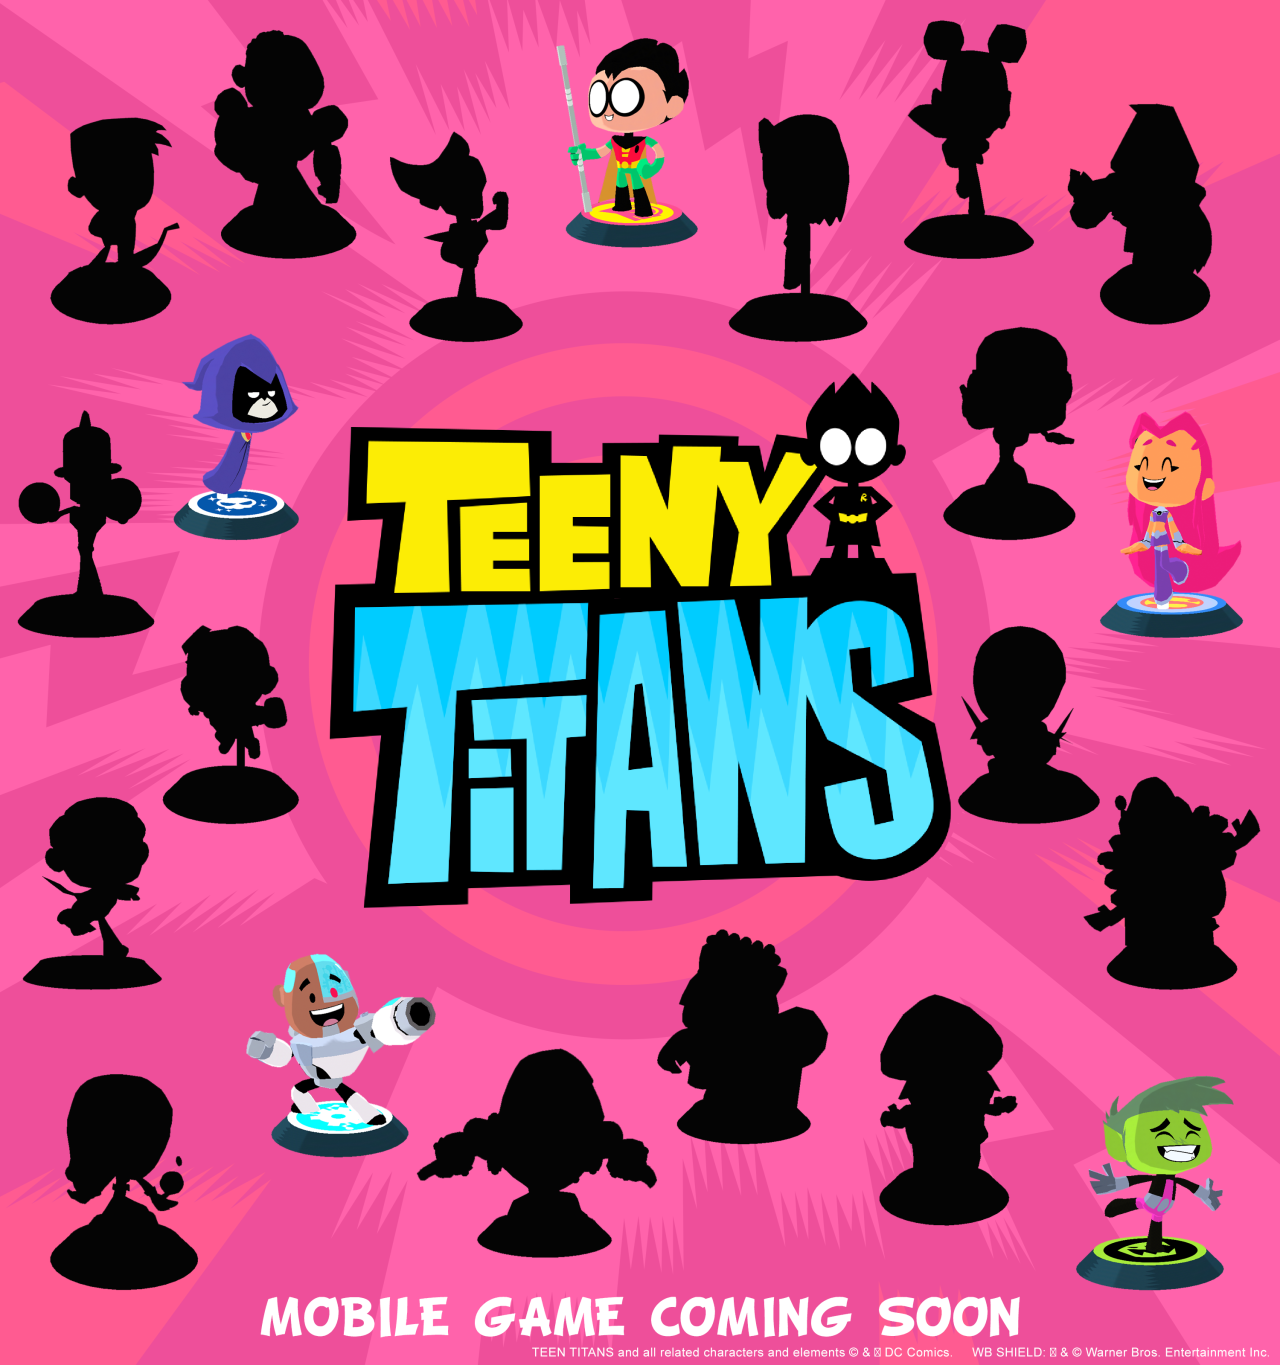 Collect figures. Battle opponents. Become the Teeny Titans champion.Coming soon to